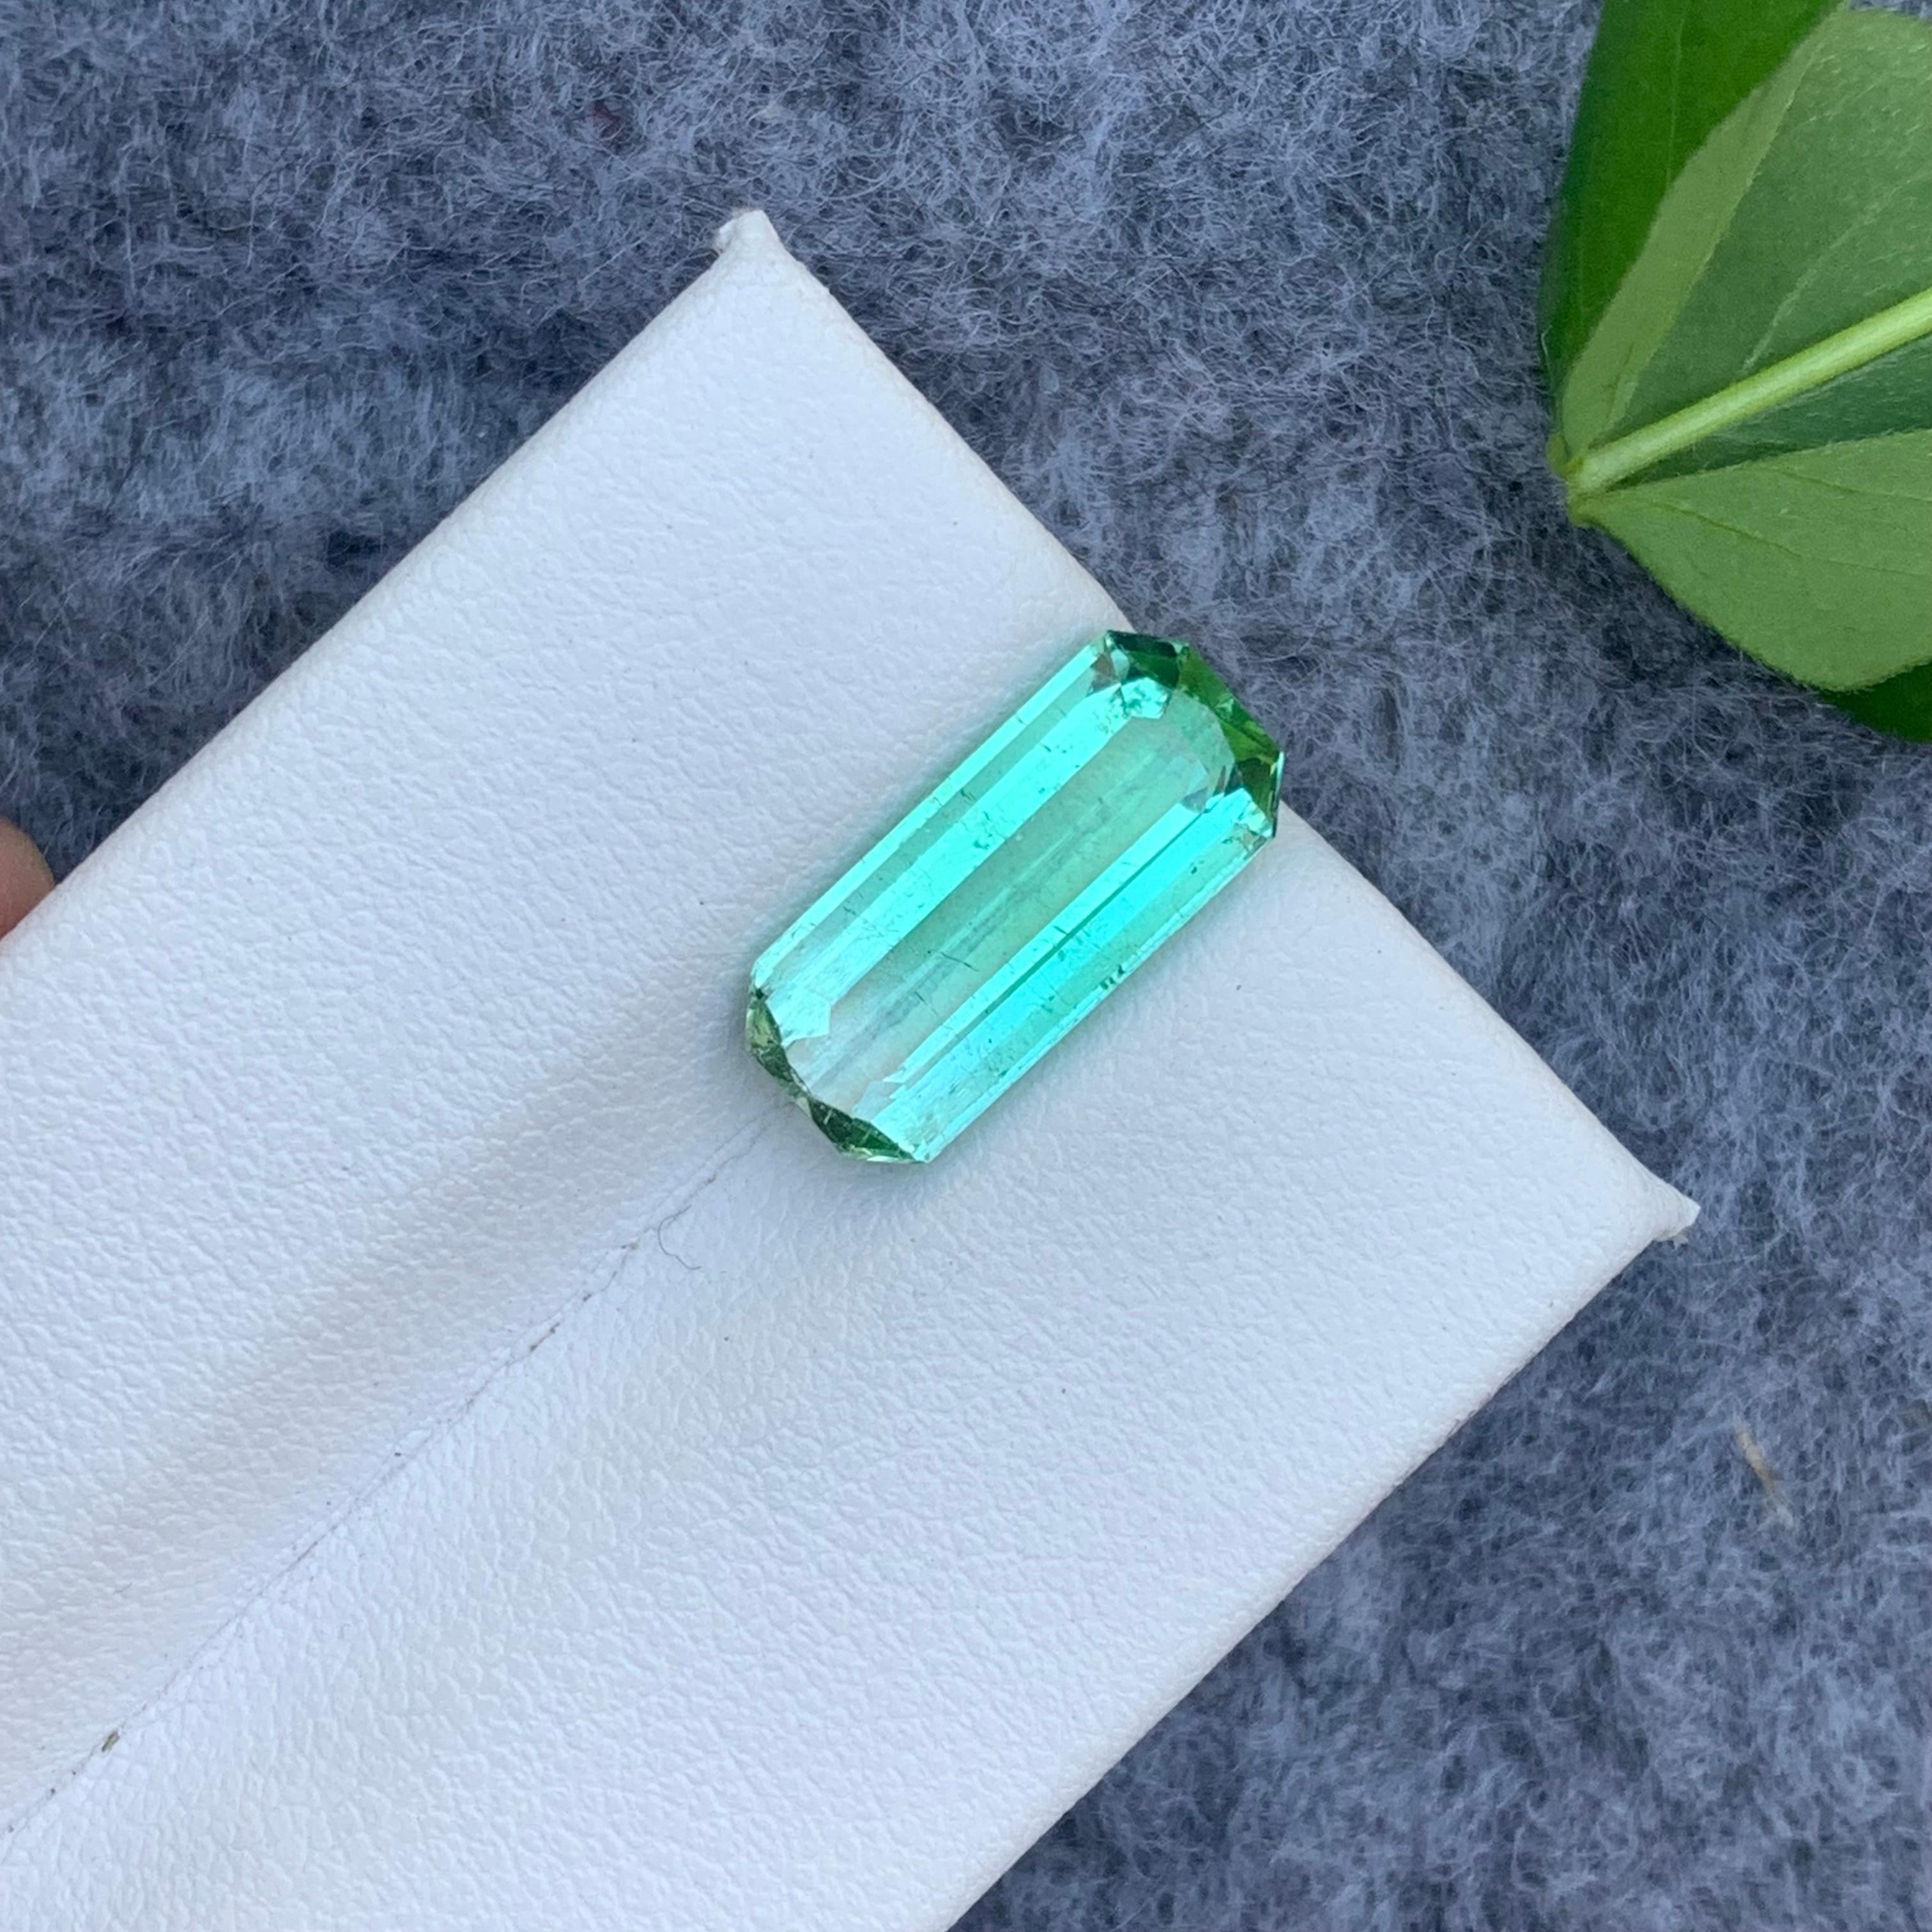 Gemstone Type : Tourmaline
Weight : 4.40 Carats
Dimensions : 14.8x6.5x5.1 Mm
Origin : Kunar Afghanistan
Clarity : SI
Shape: Baguette
Color: Mintgreen 
Certificate: On Demand
Basically, mint tourmalines are tourmalines with pastel hues of light green